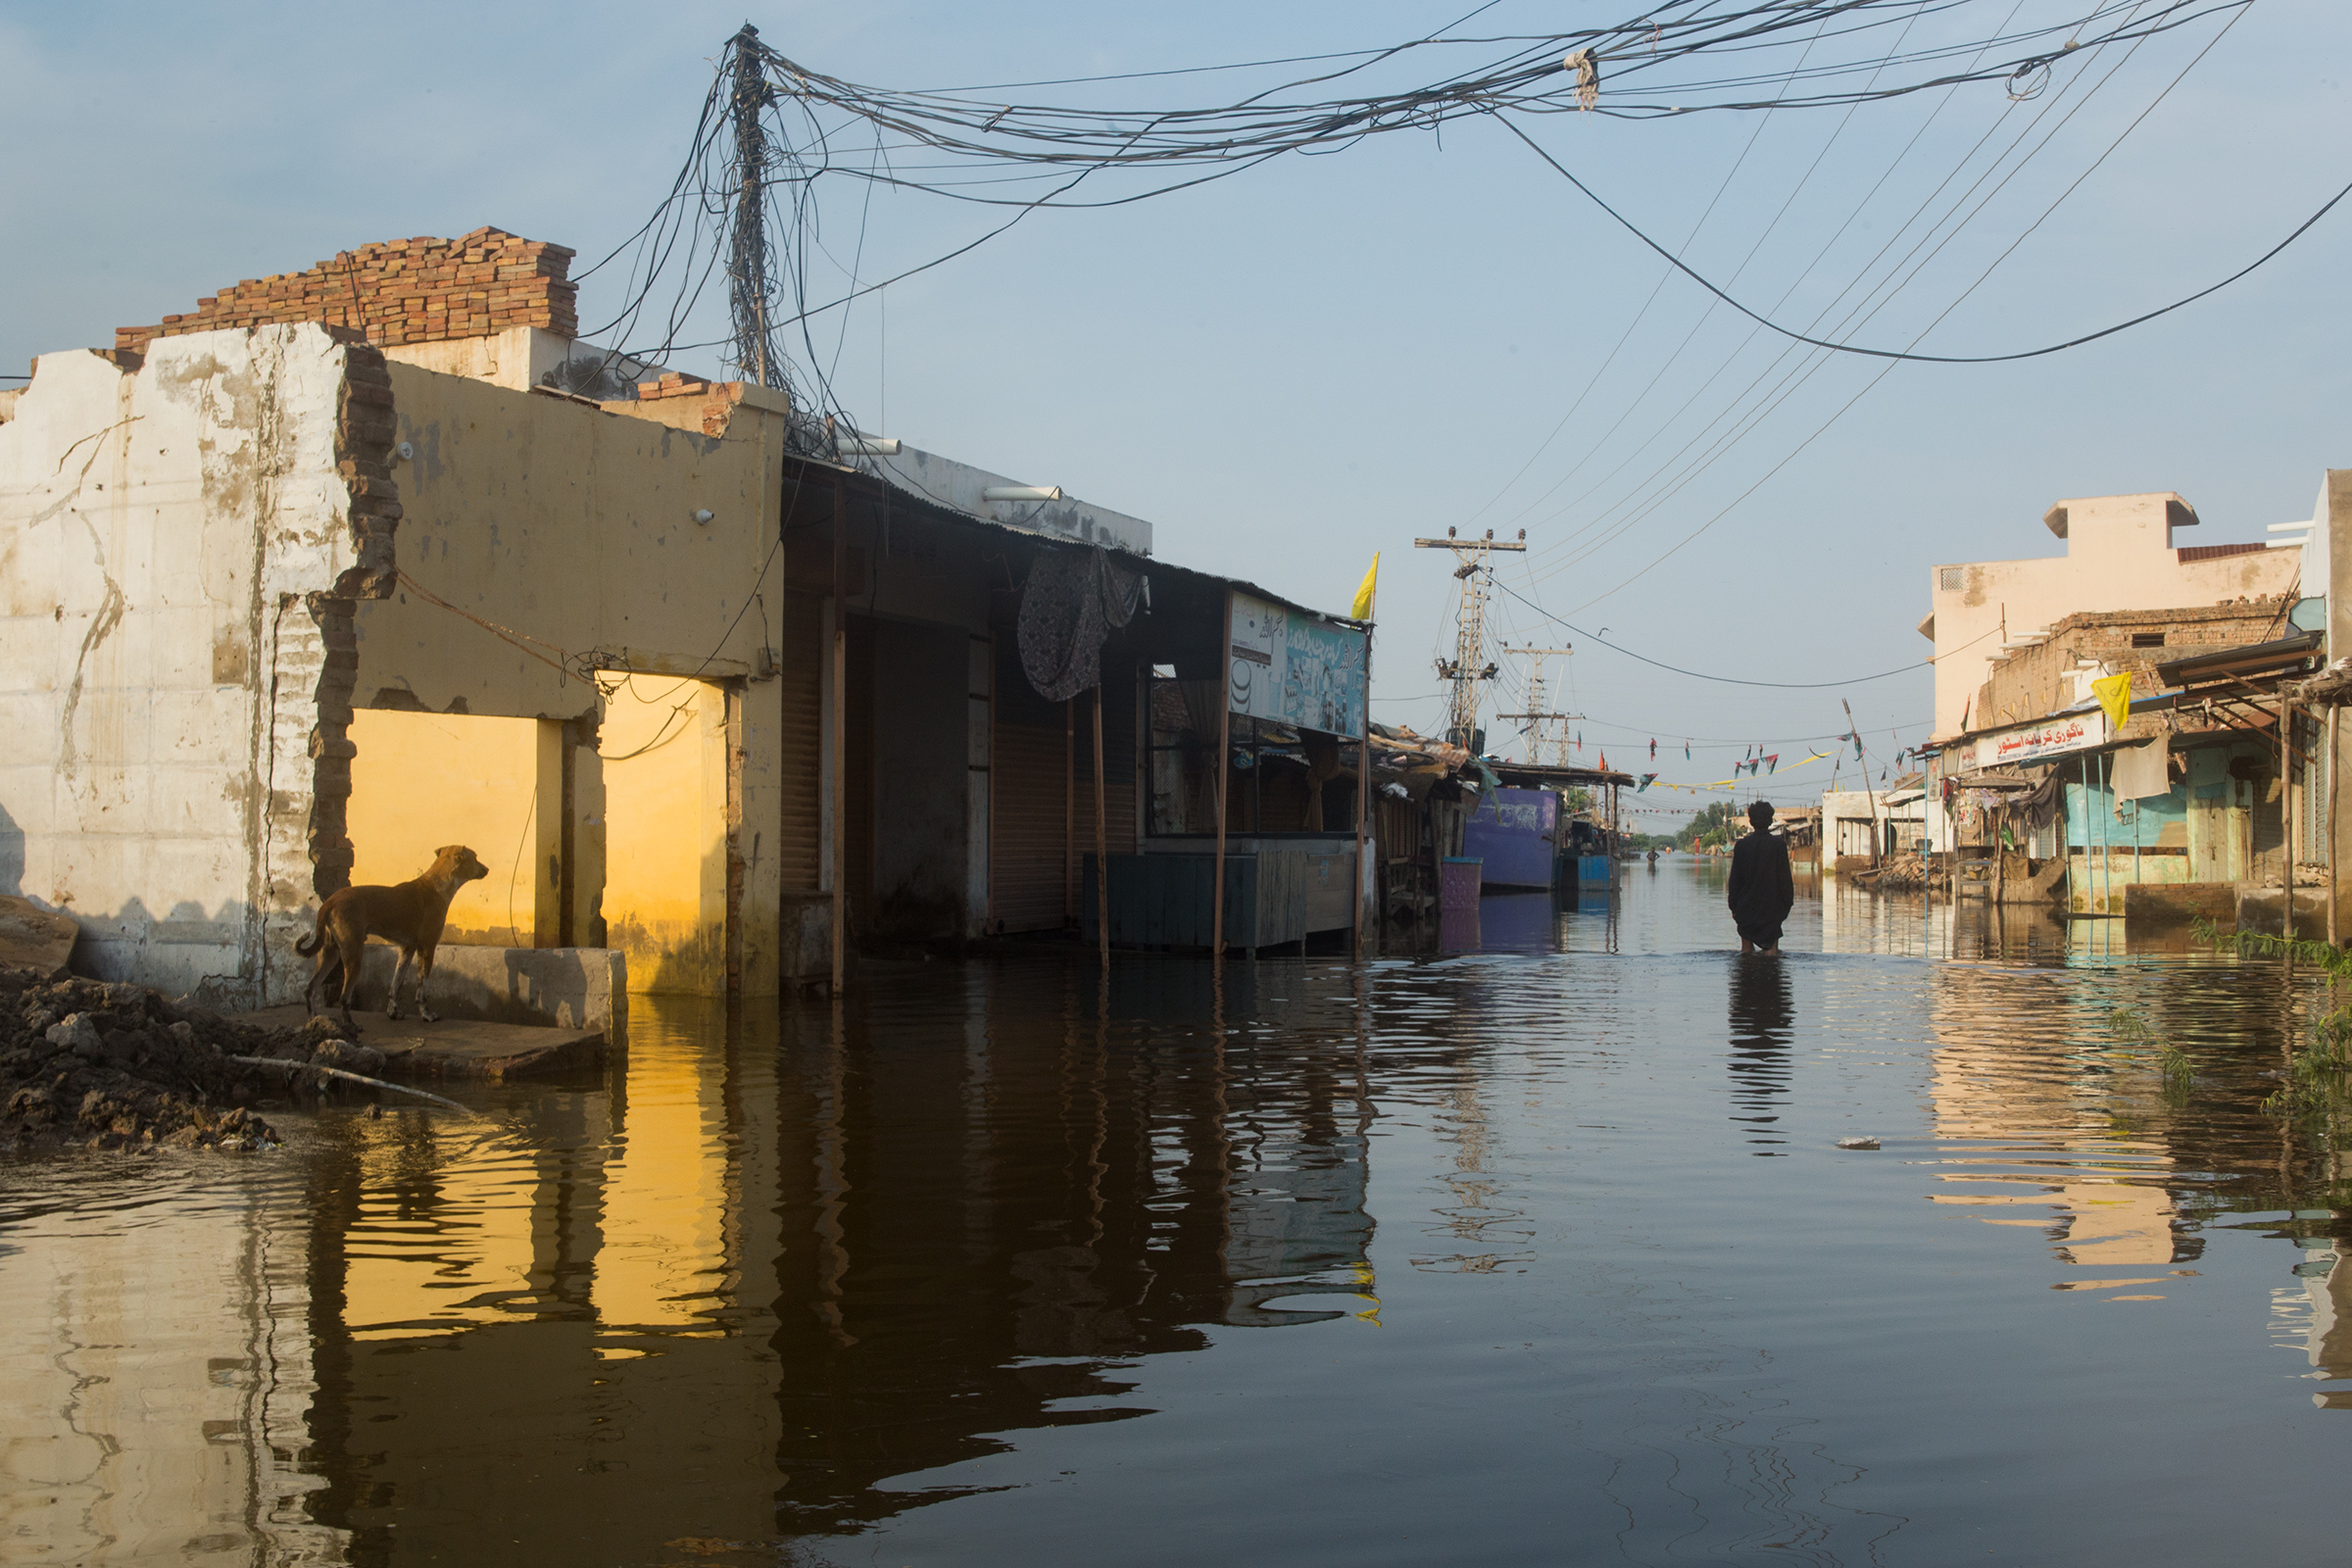 A flooded bazaar in Jhuddo, Sindh province, Pakistan (Hassaan Gondal for TIME)